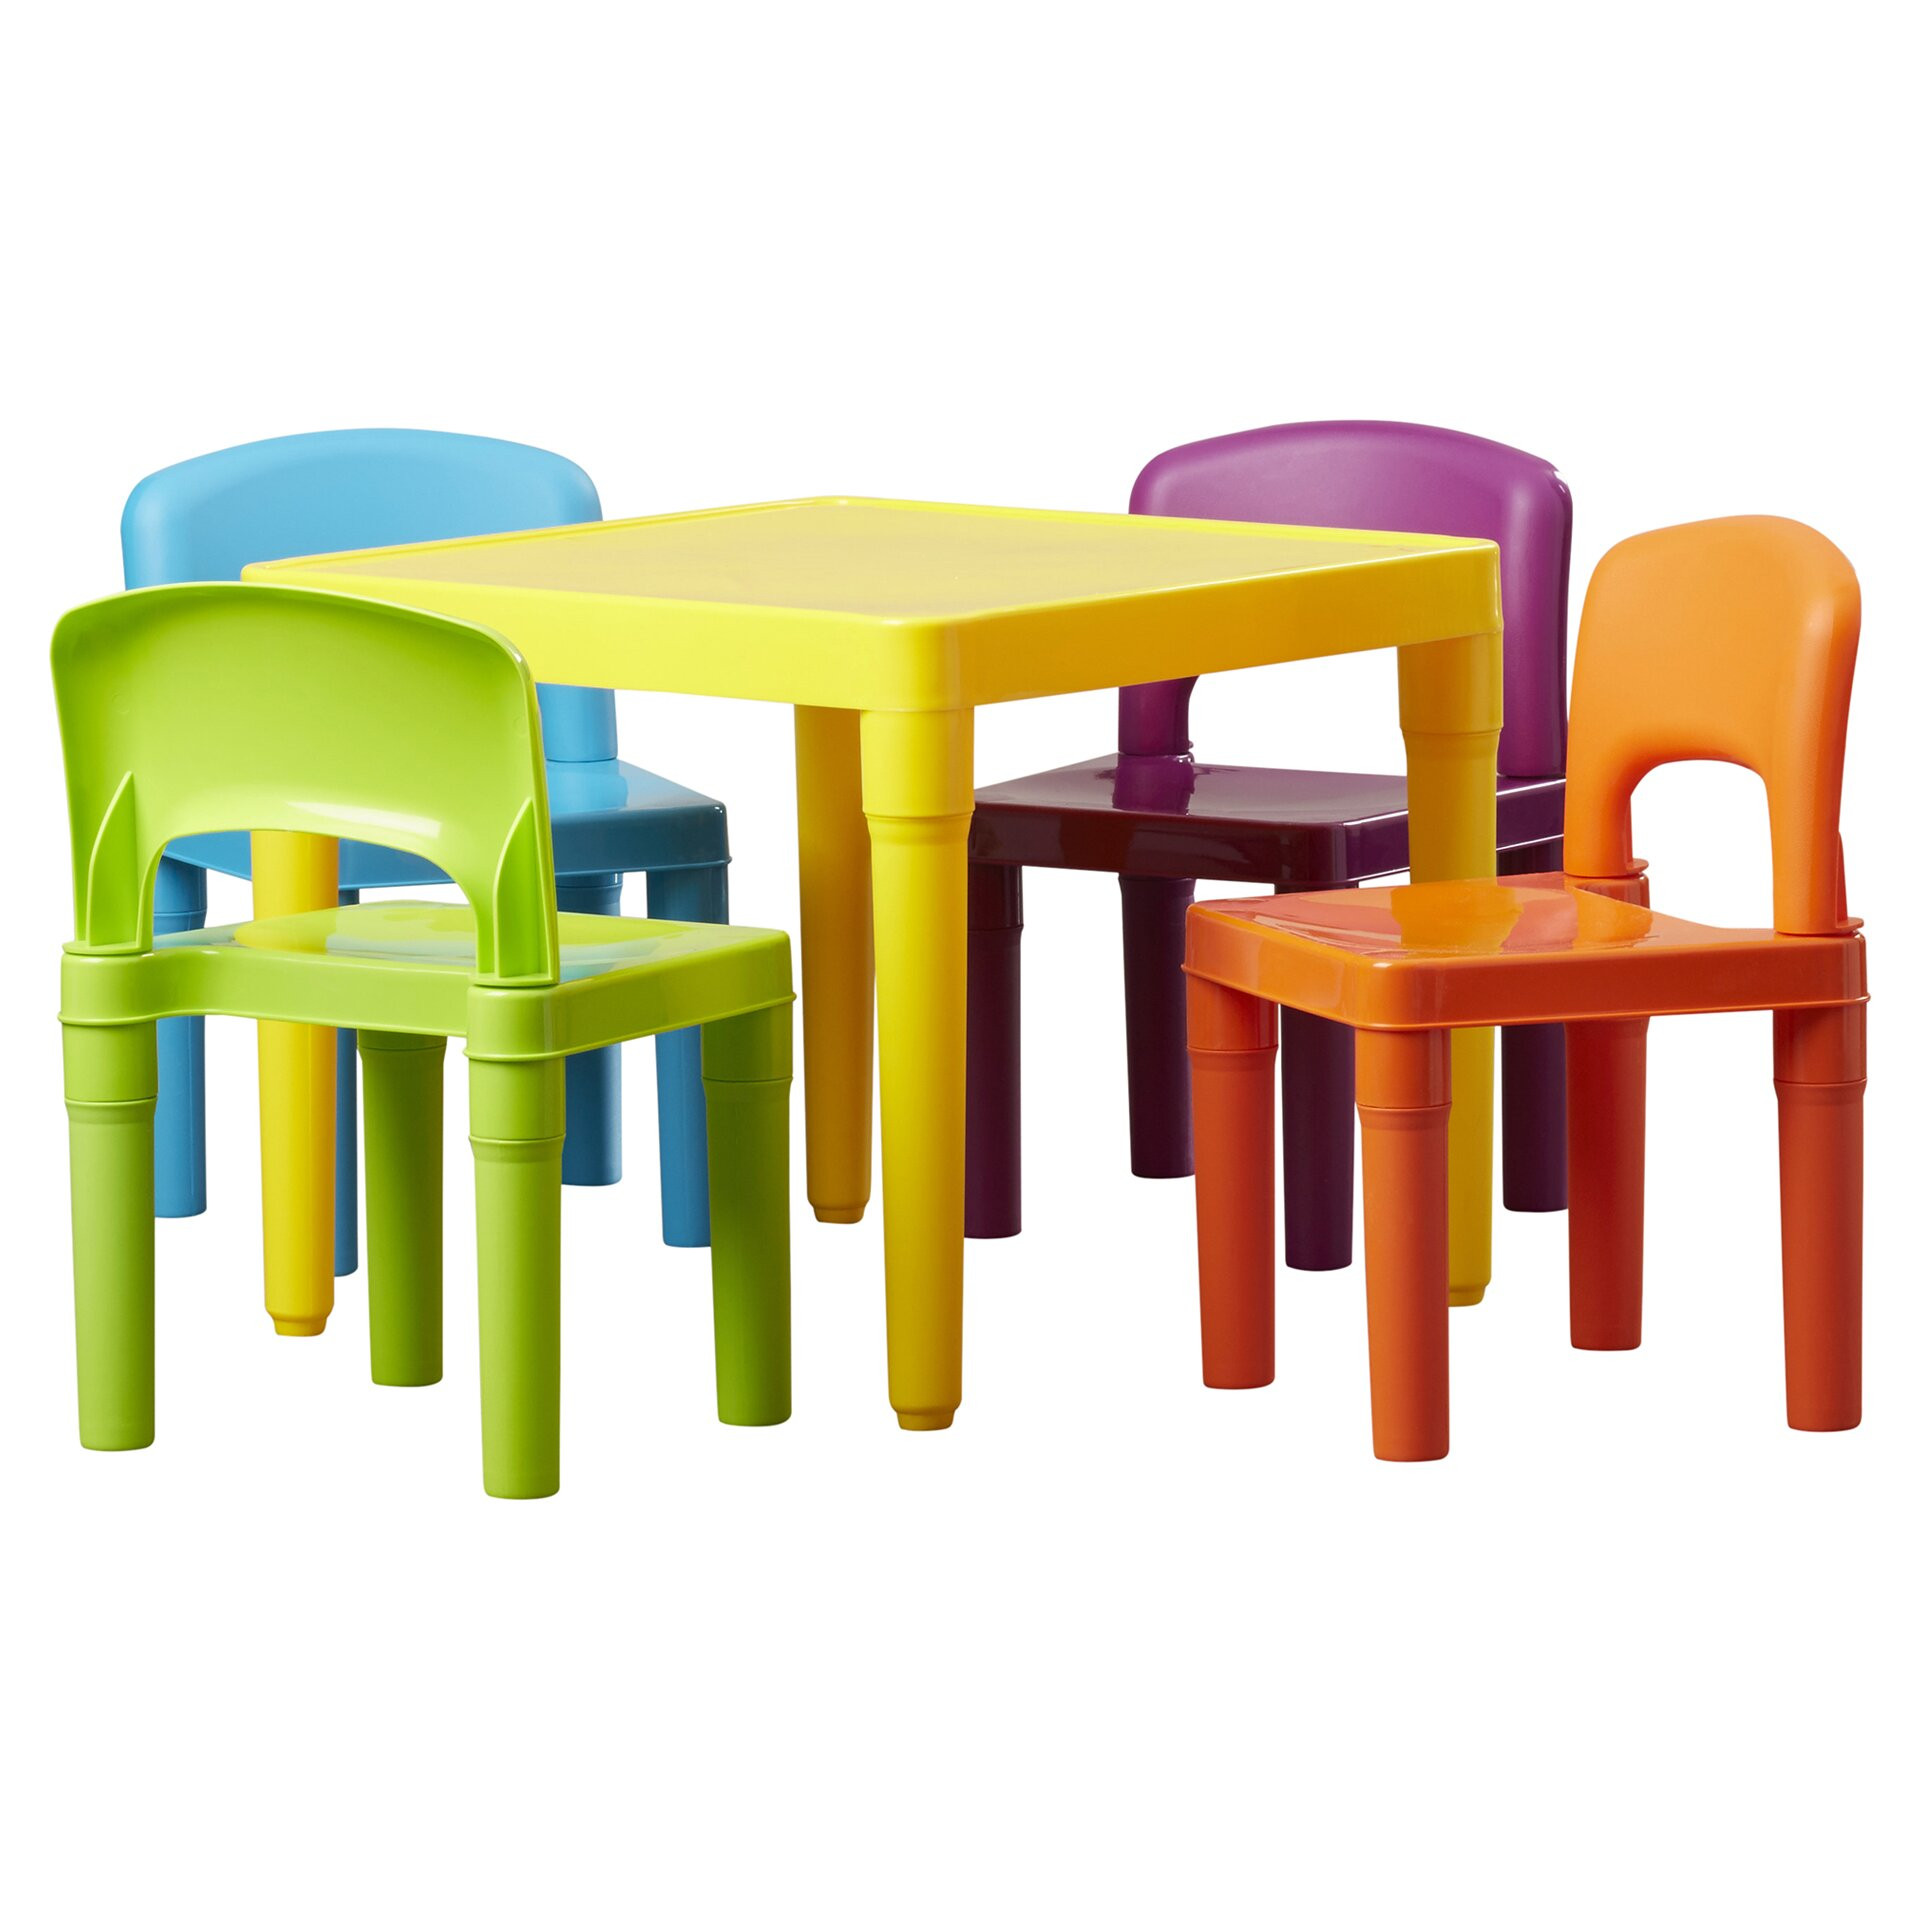 Kids Table And Chair Set
 Tot Tutors Kids 5 Piece Plastic Table and Chair Set